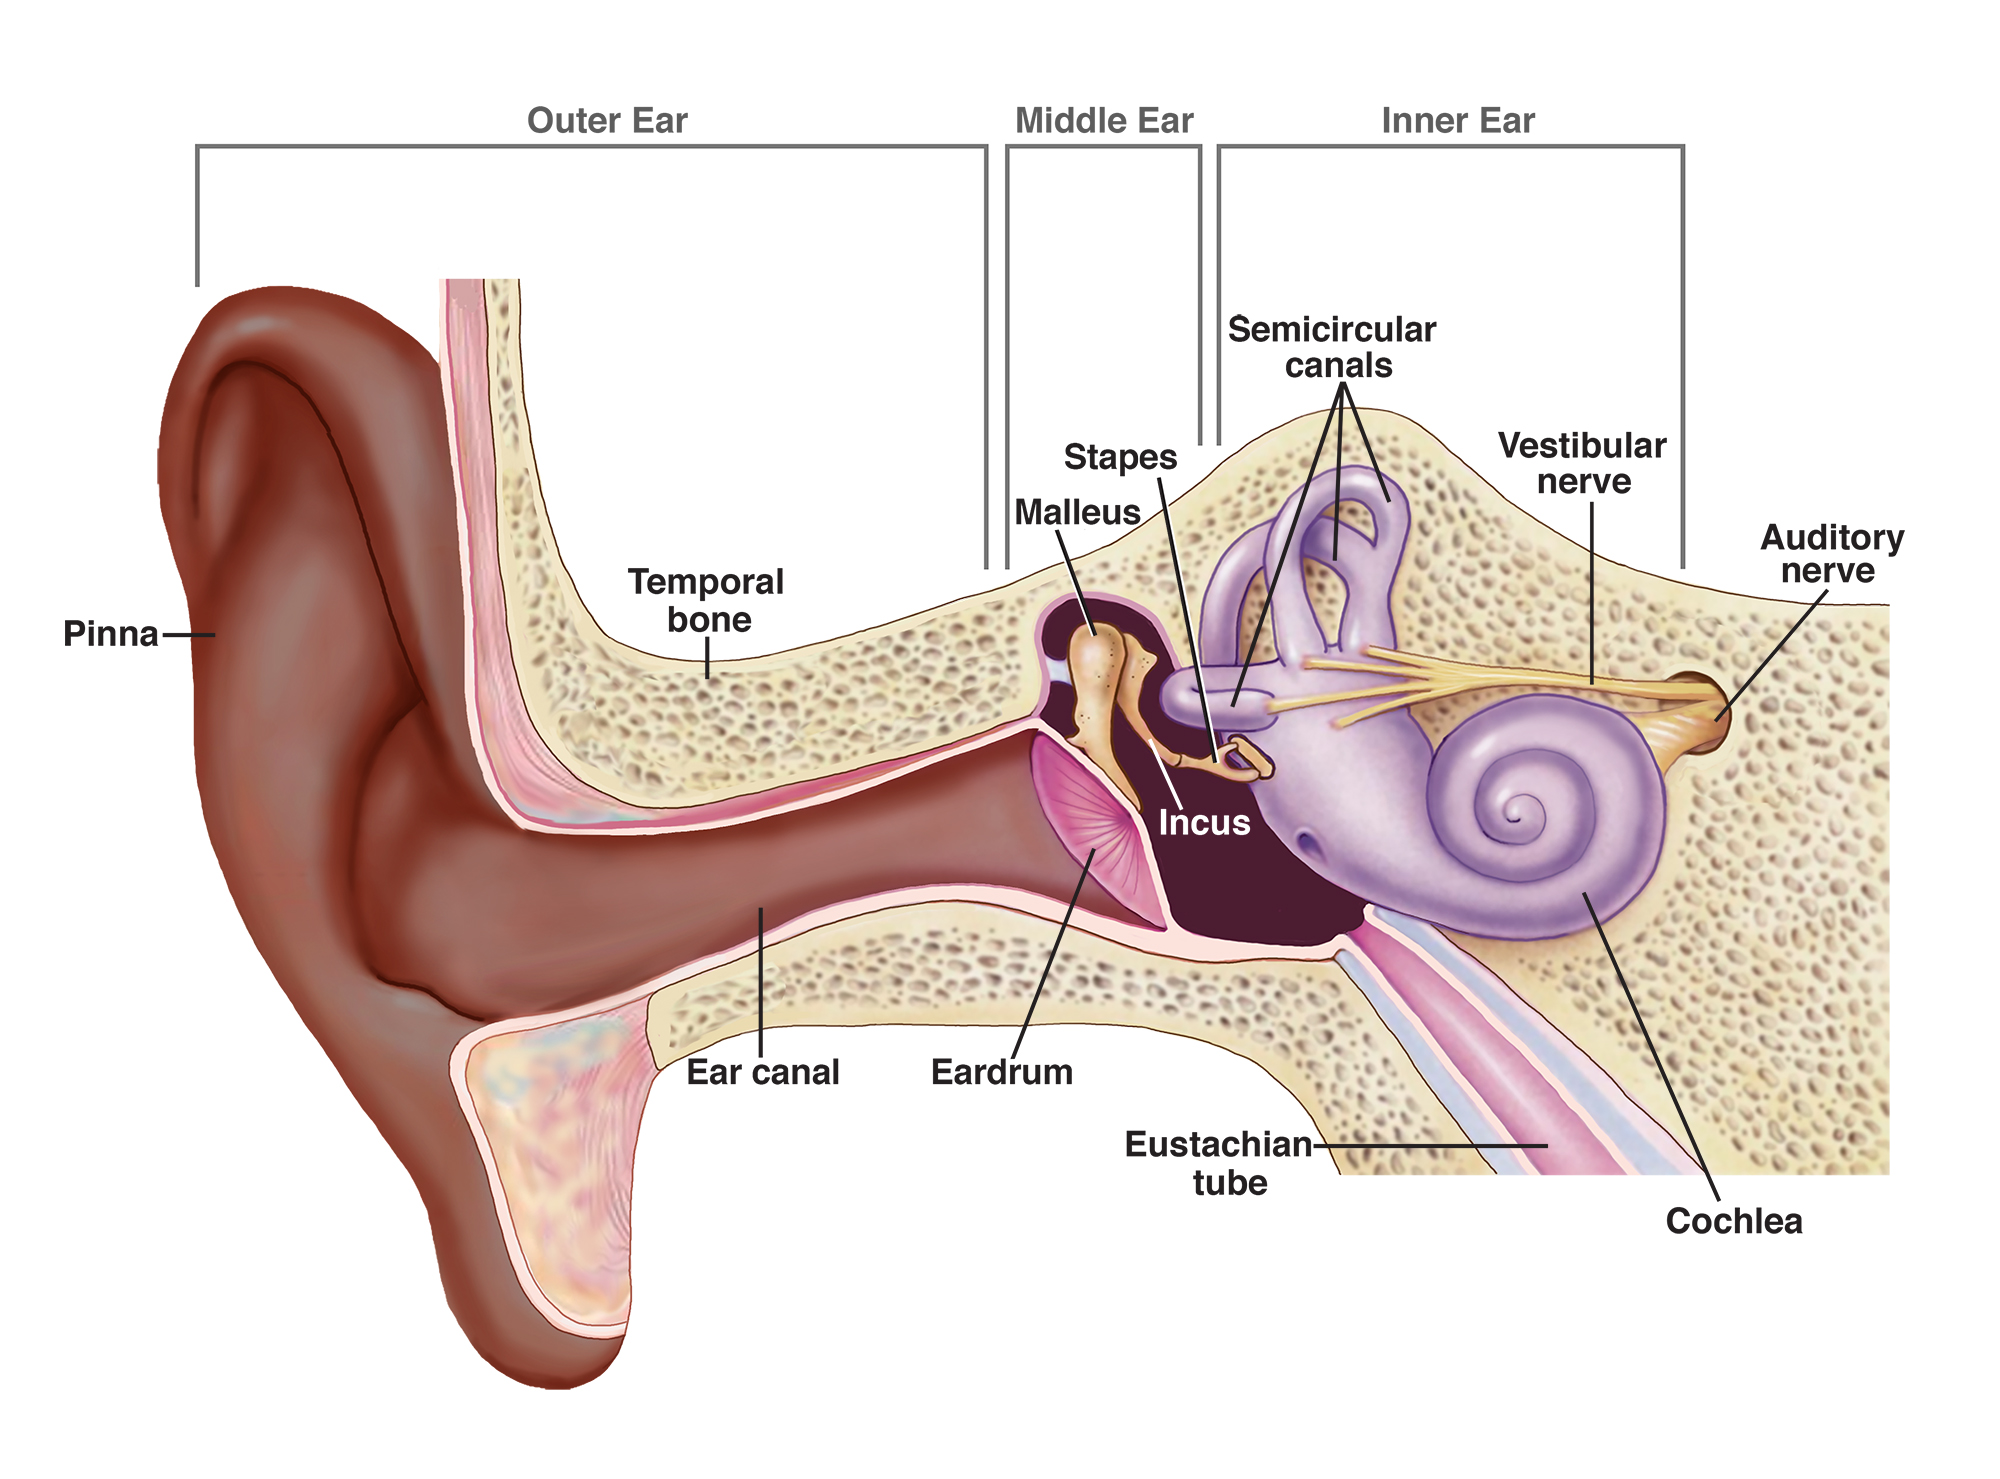 The outer ear includes the pinna, temporal bone, and ear canal. The middle ear includes the eardrum, malleus, incus, and stapes. The inner ear includes semicircular canals, eustachian tube, cochlea, and vestibule and auditory nerves.